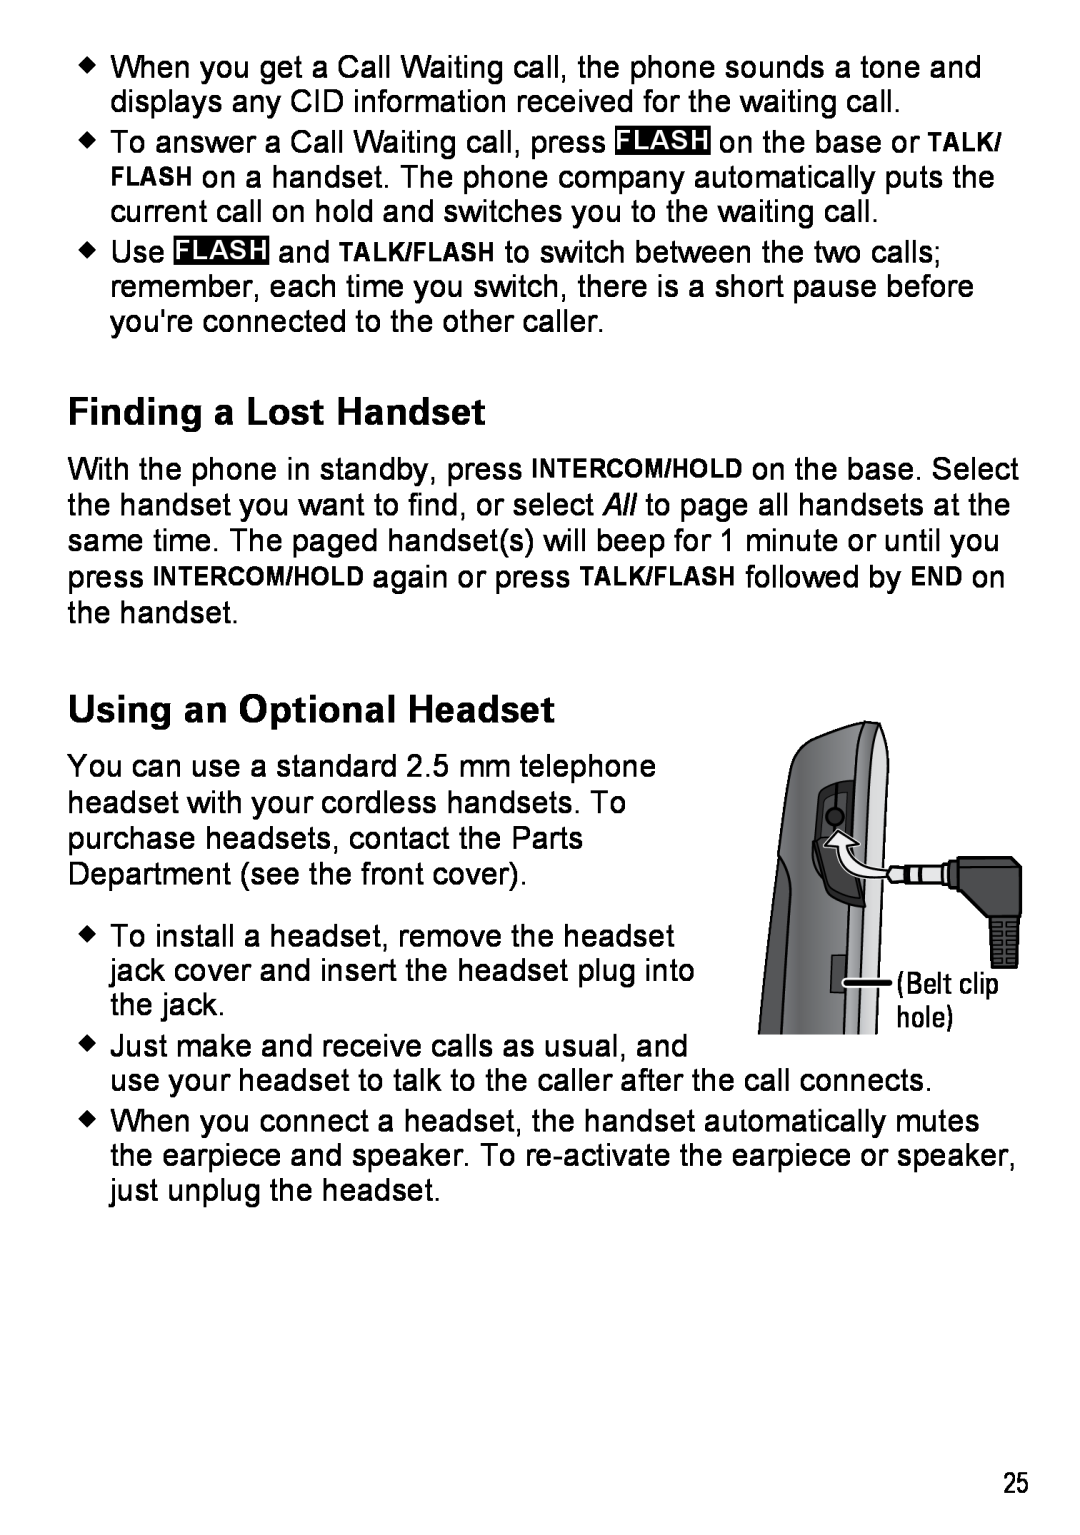 Uniden DECT4086-2, DECT4086-4, DECT4086-3, DECT4086-5, DECT4086-6 manual Finding a Lost Handset, Using an Optional Headset 